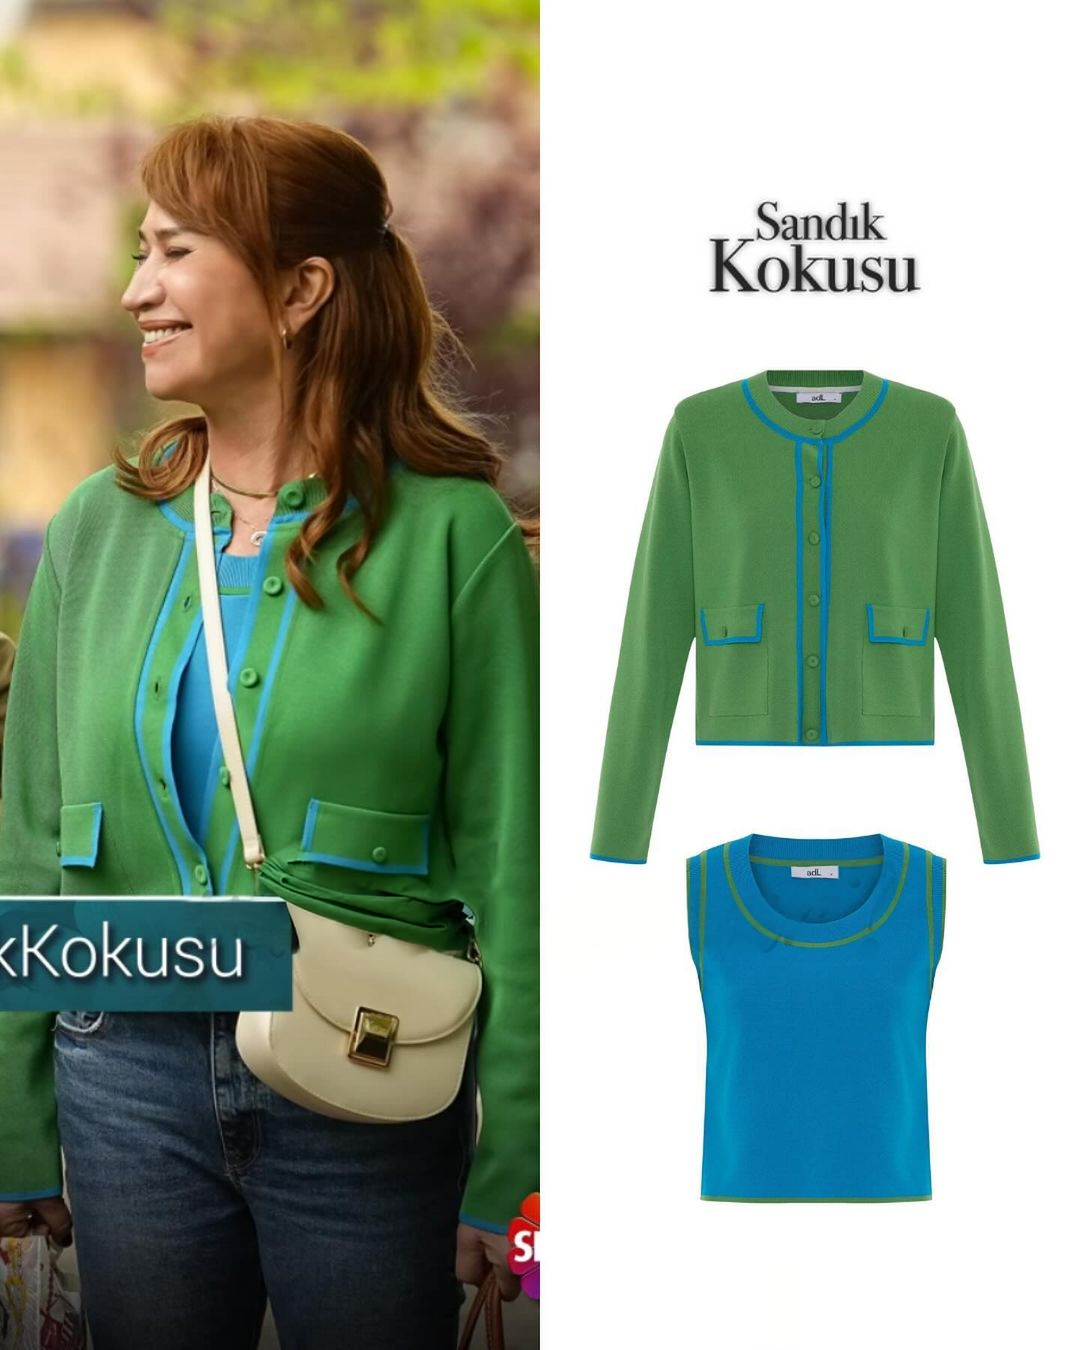 The Green Cardigan and Blue Blouse Worn By Demet Akbağ